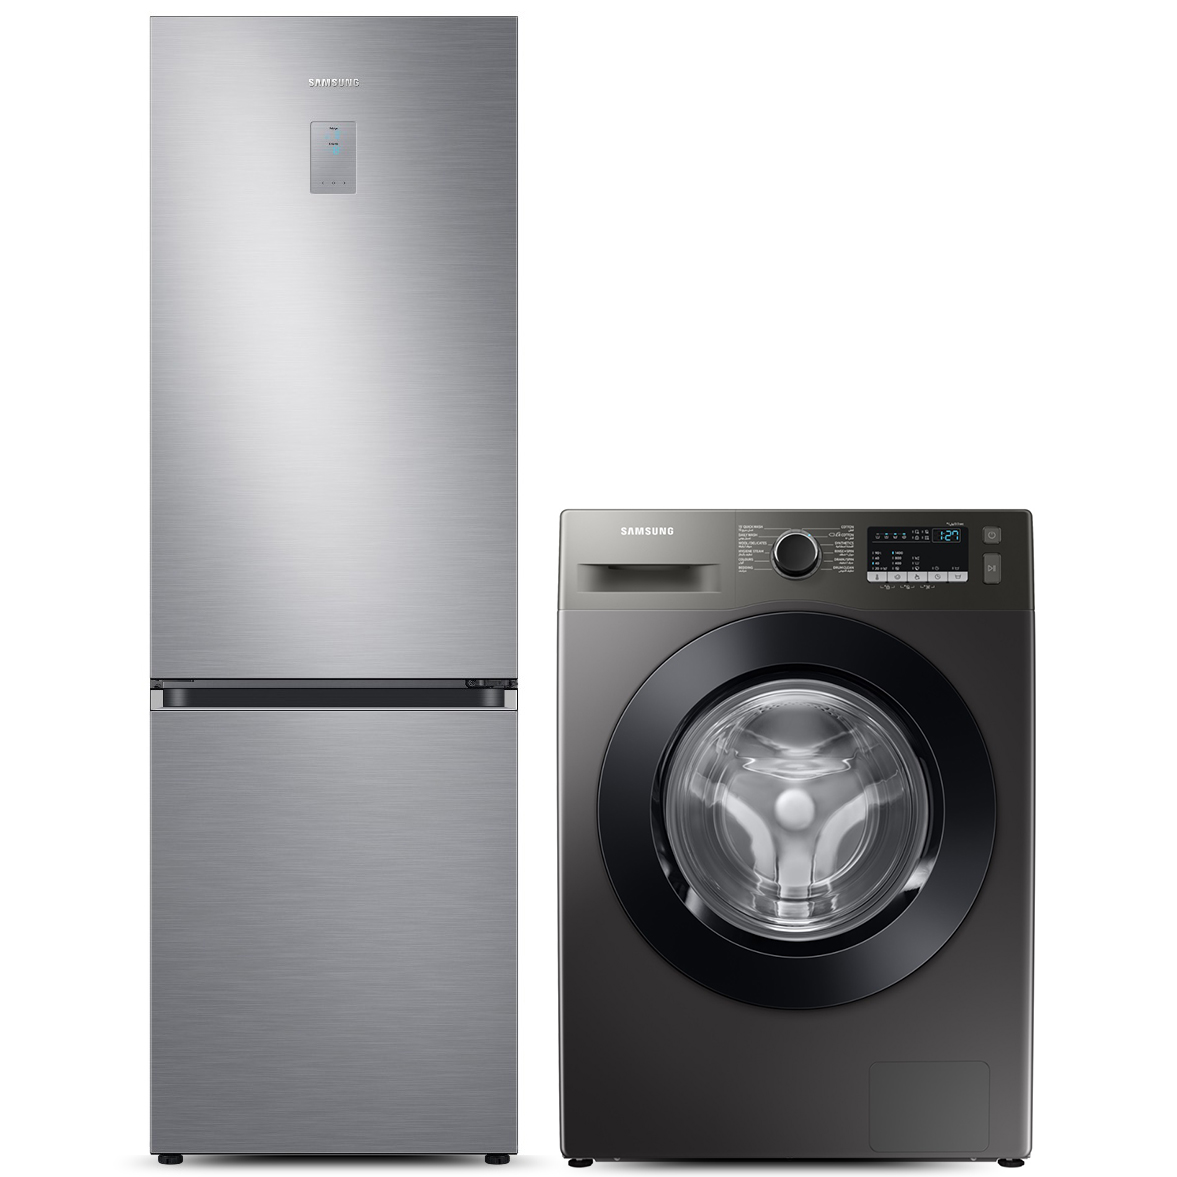 Samsung Front Load Automatic Washing Machine, 7 KG - WW70T4020CX1AS with No-Frost Refrigerator, 344 Liters - RB34T671FS9 MR